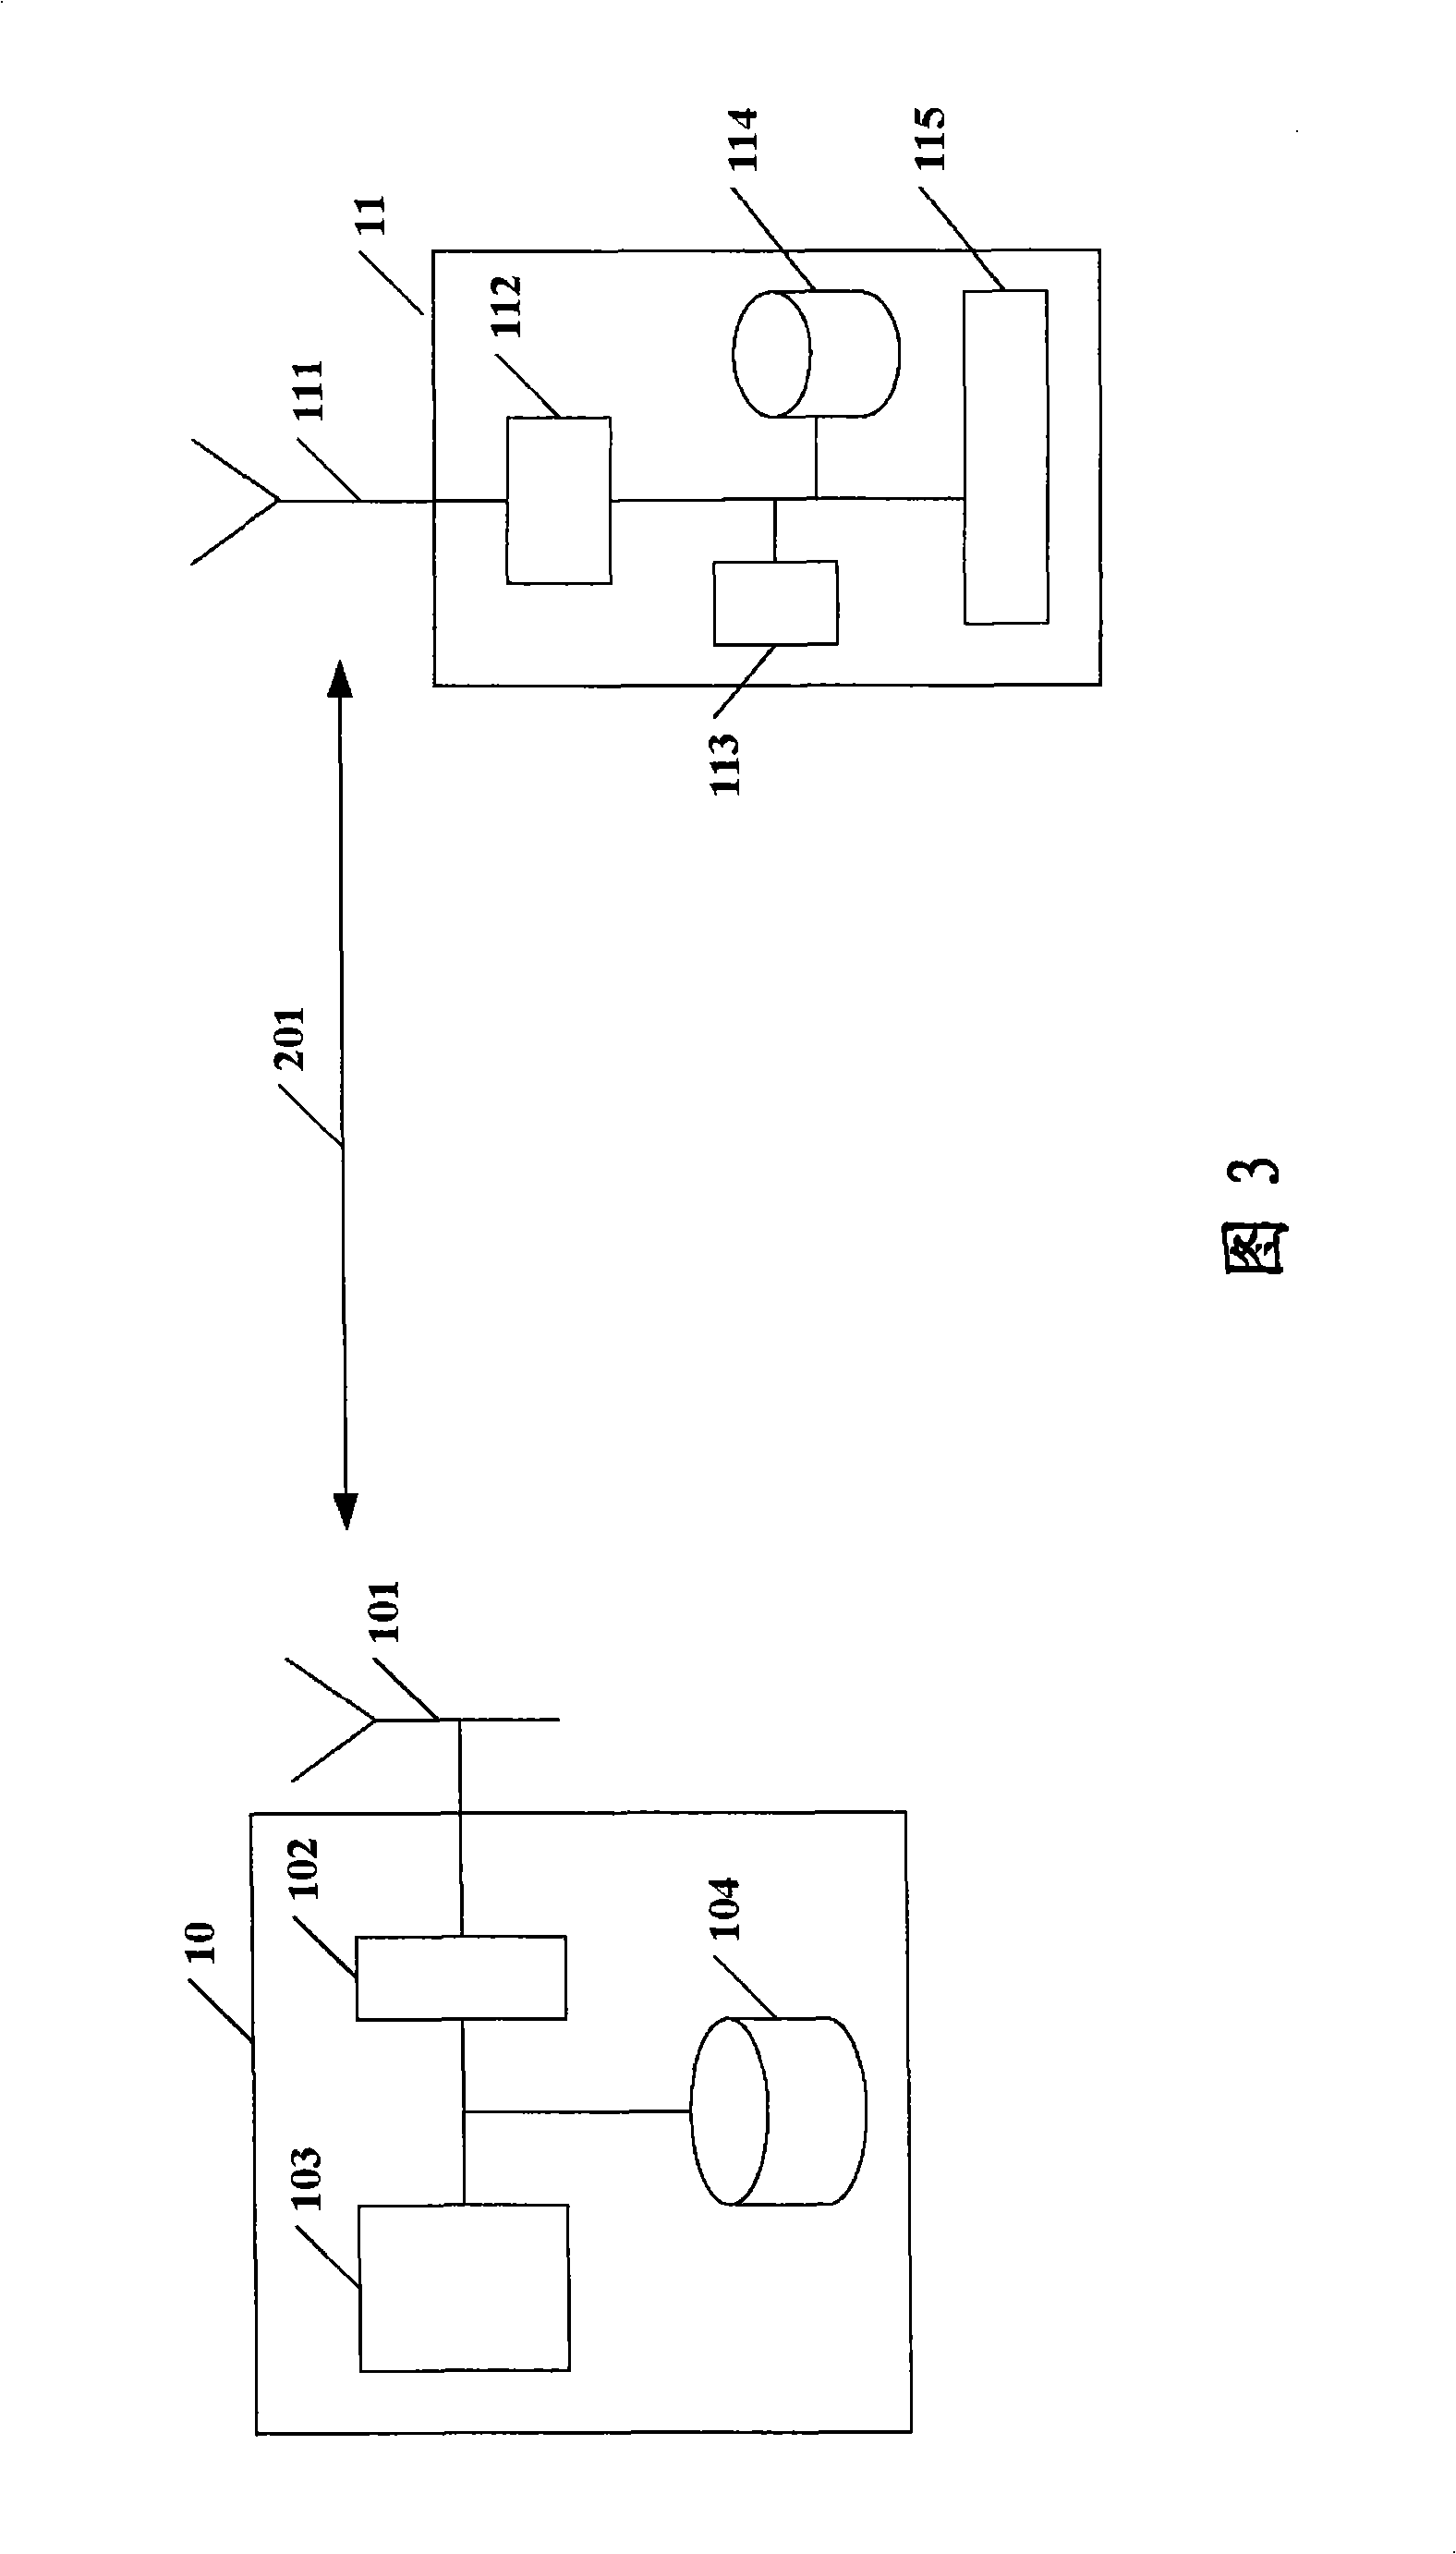 Method of providing a voIP connection